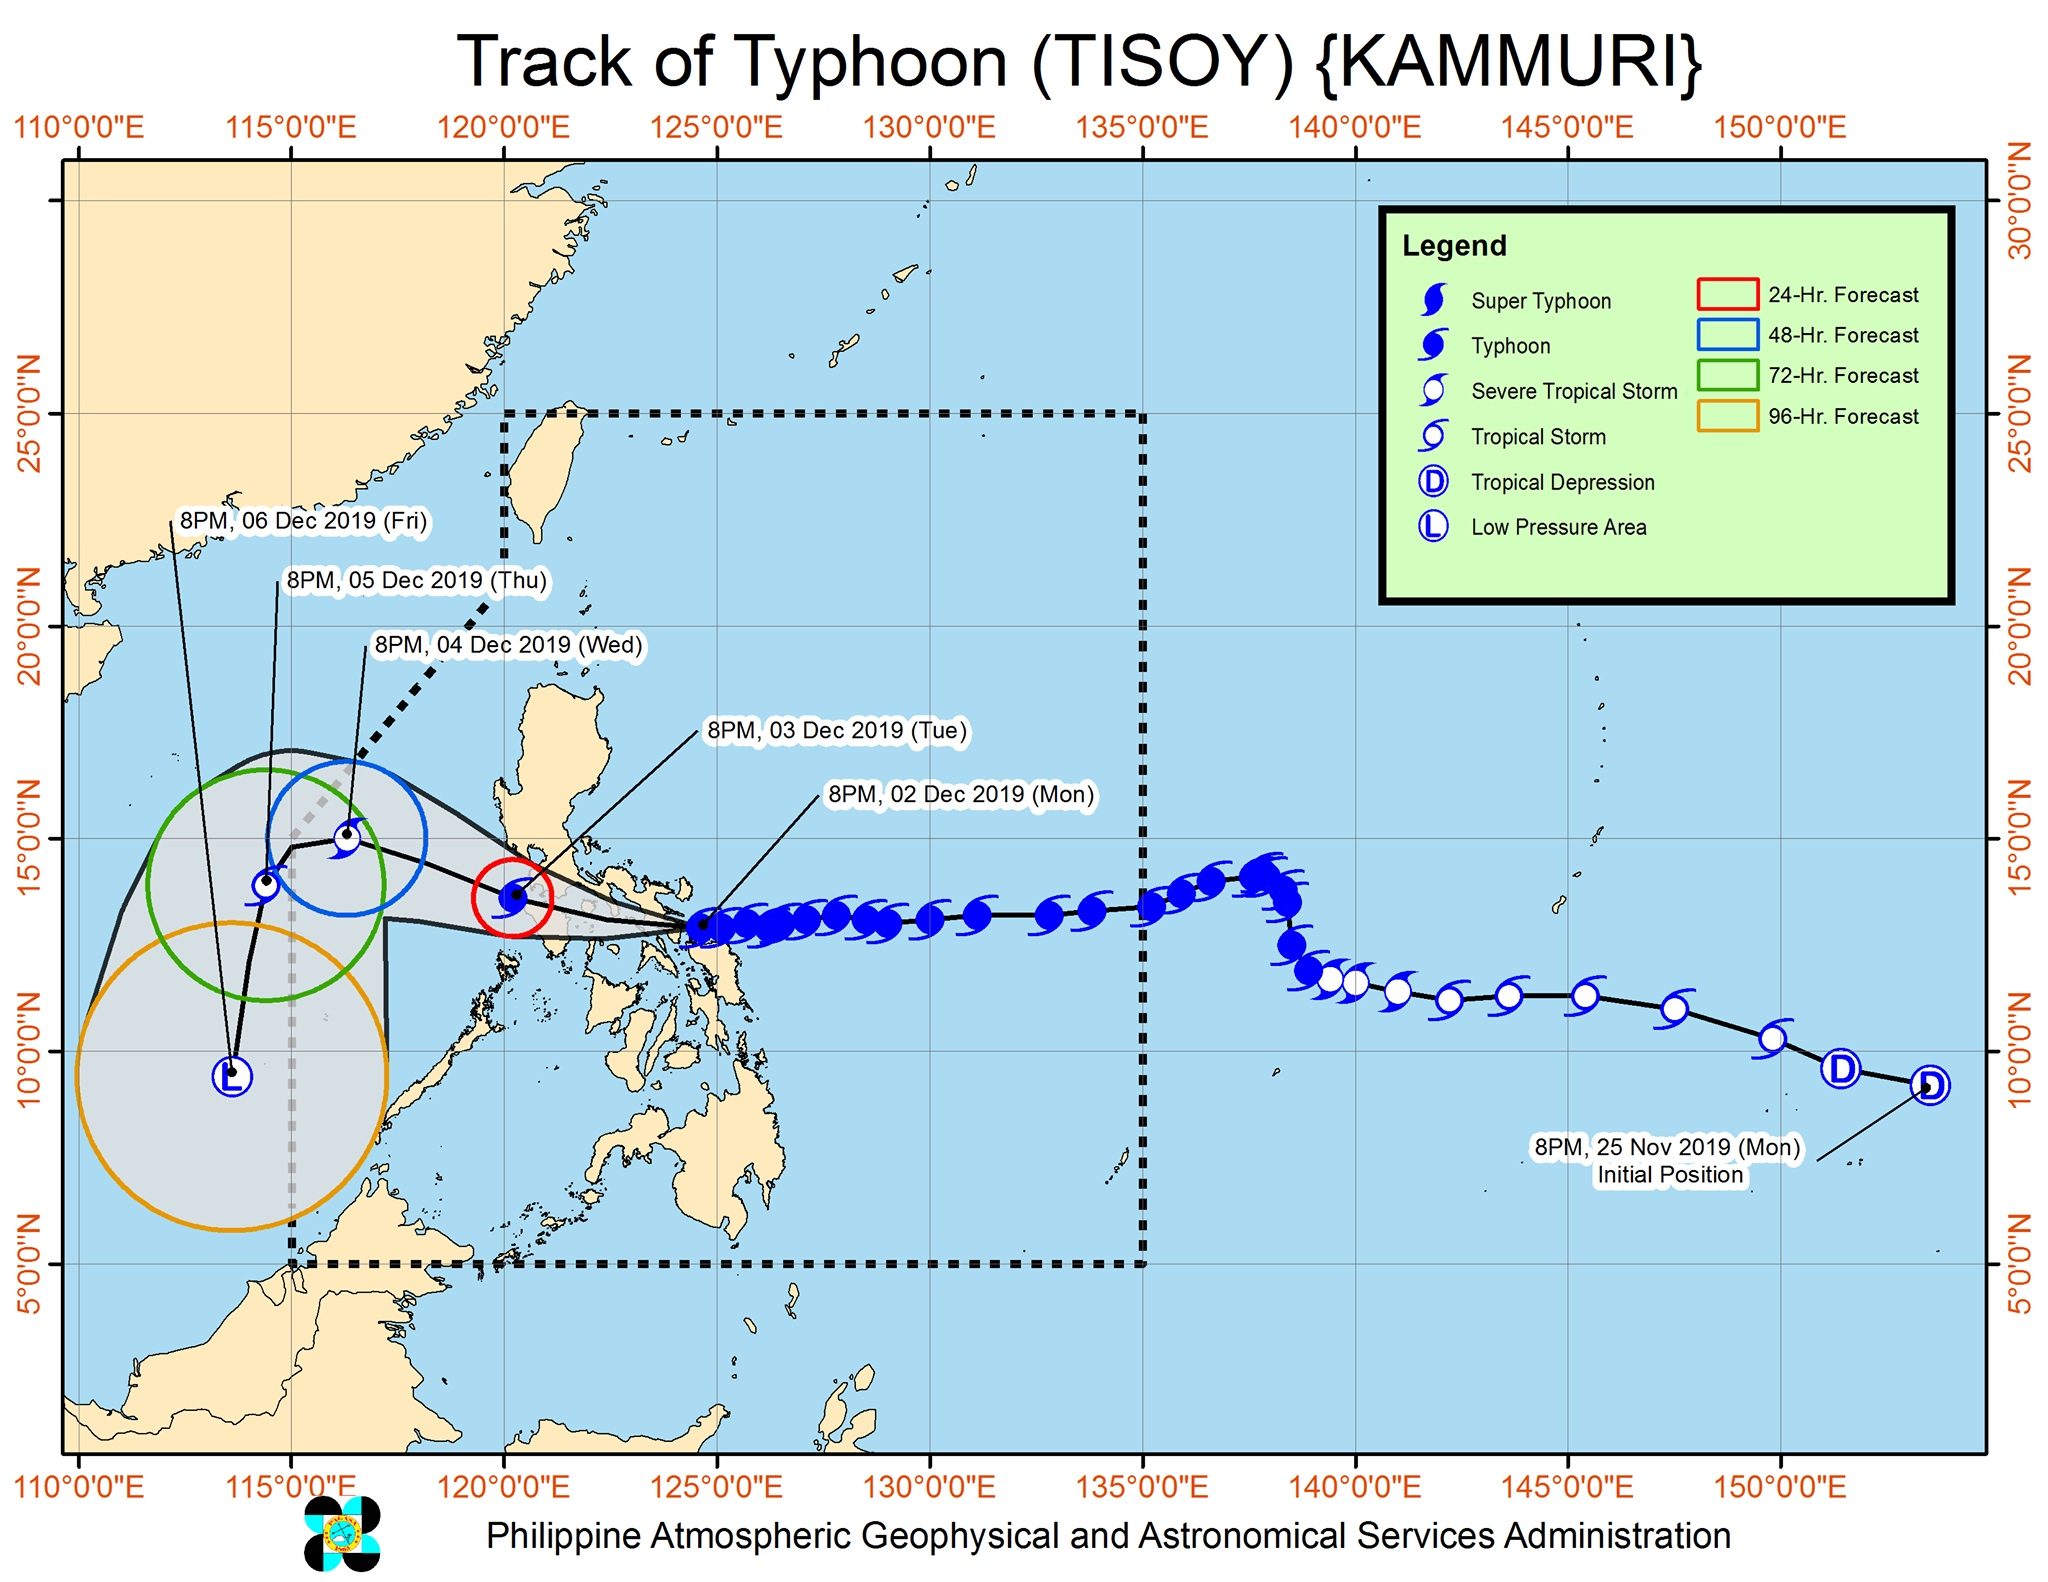 Forecast track of Typhoon Tisoy (Kammuri) as of December 2, 2019, 11 pm. Image from PAGASA 